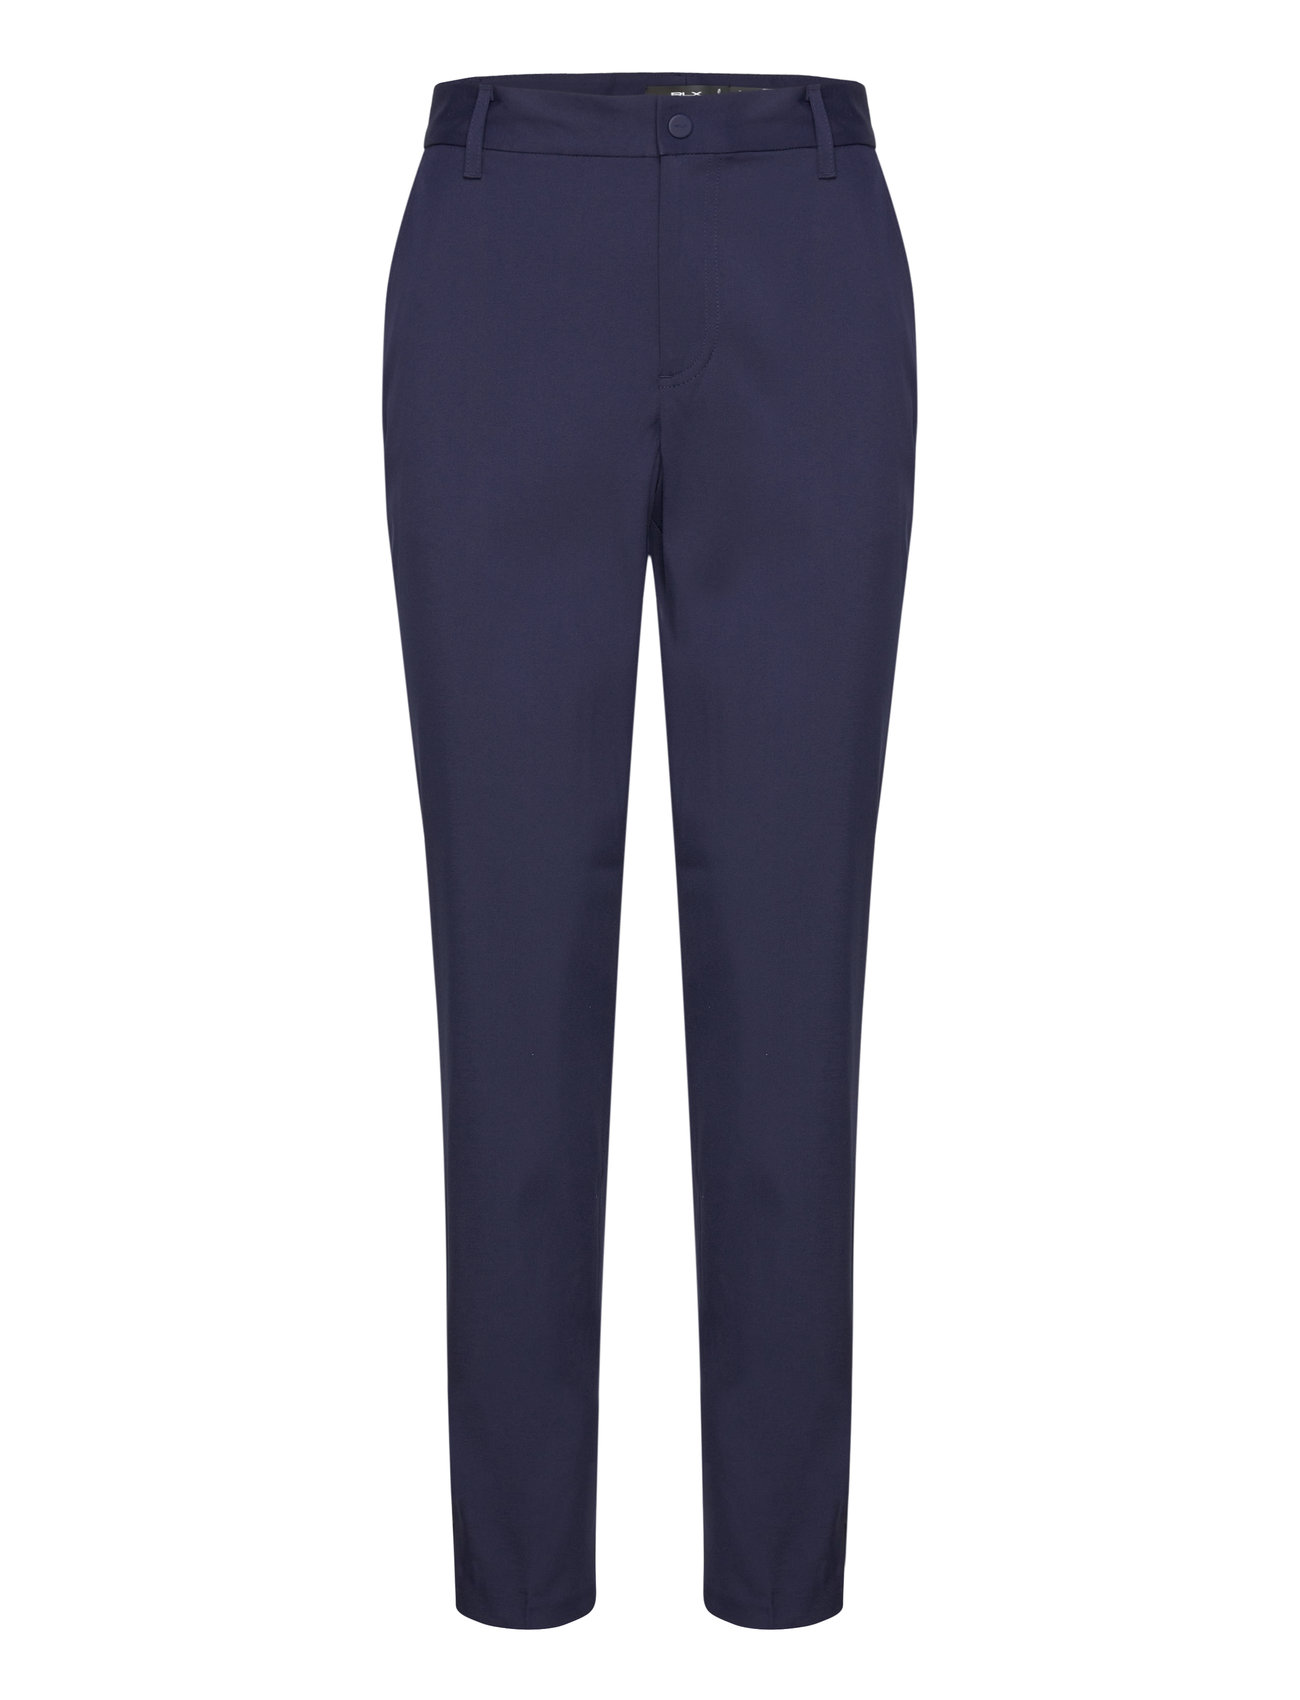 Performance 5-Pocket Stretch Twill Pant Sport Trousers Chinos Navy Ralph Lauren Golf